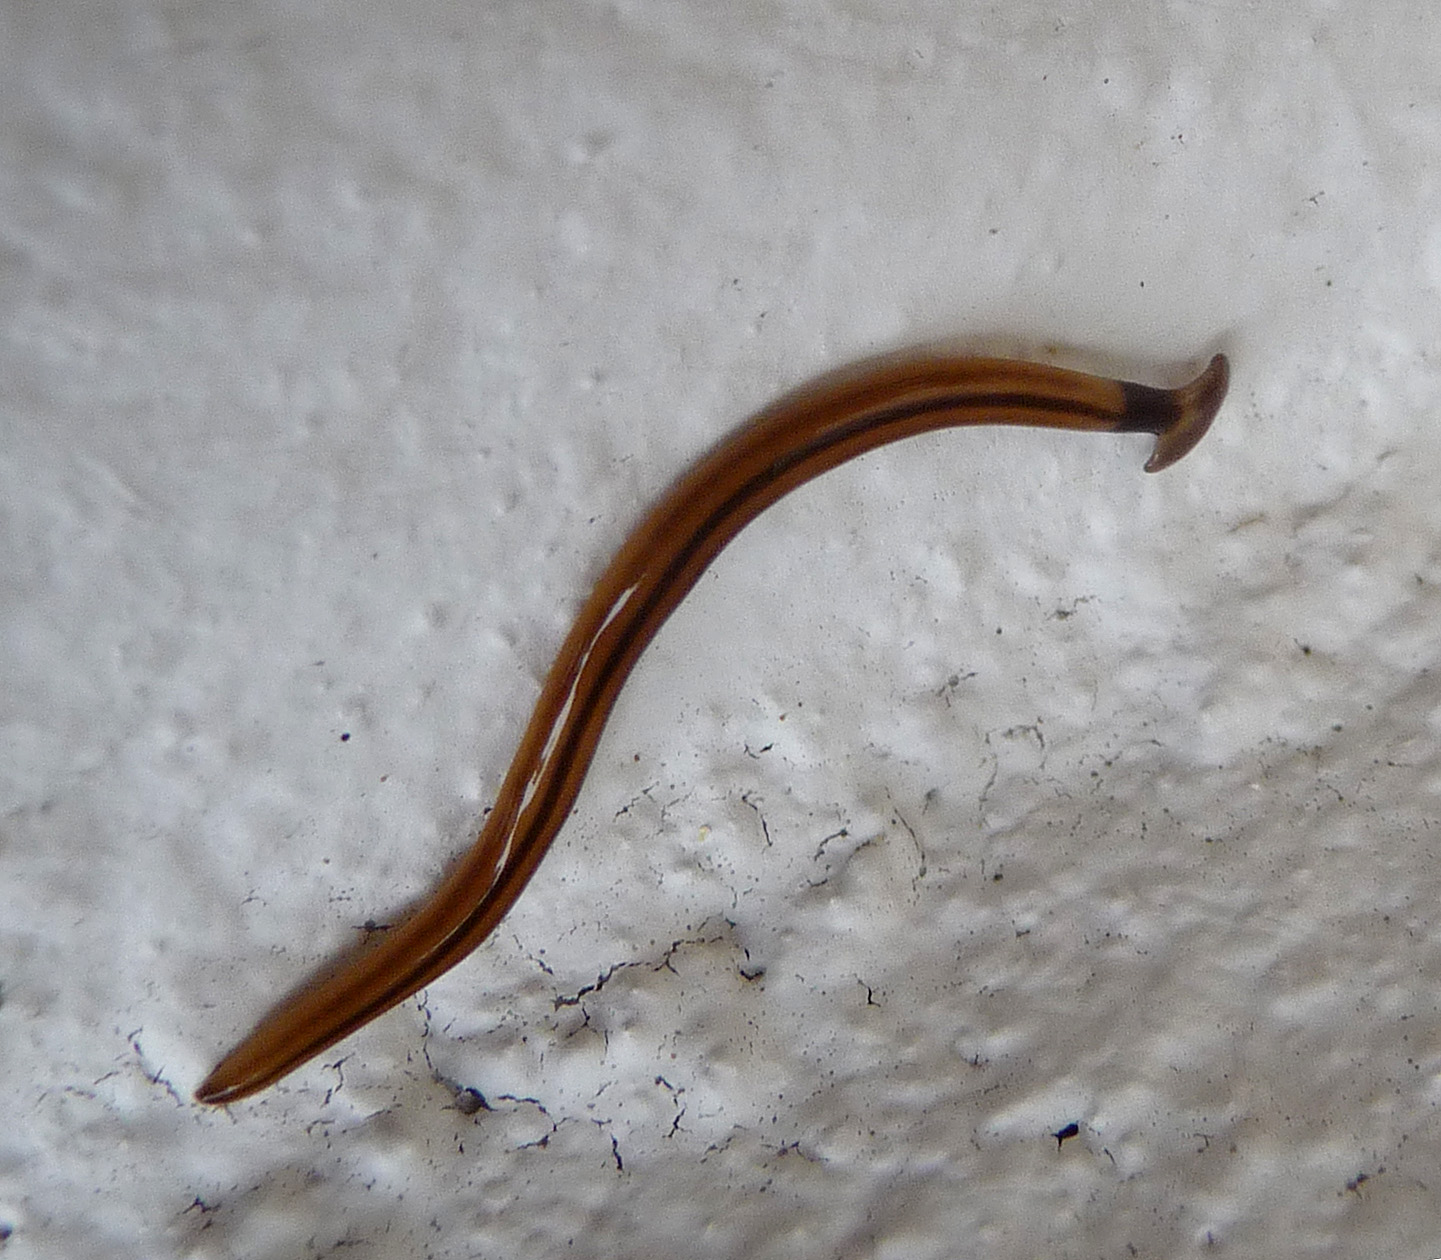 a brown caterpillar crawling across a white surface